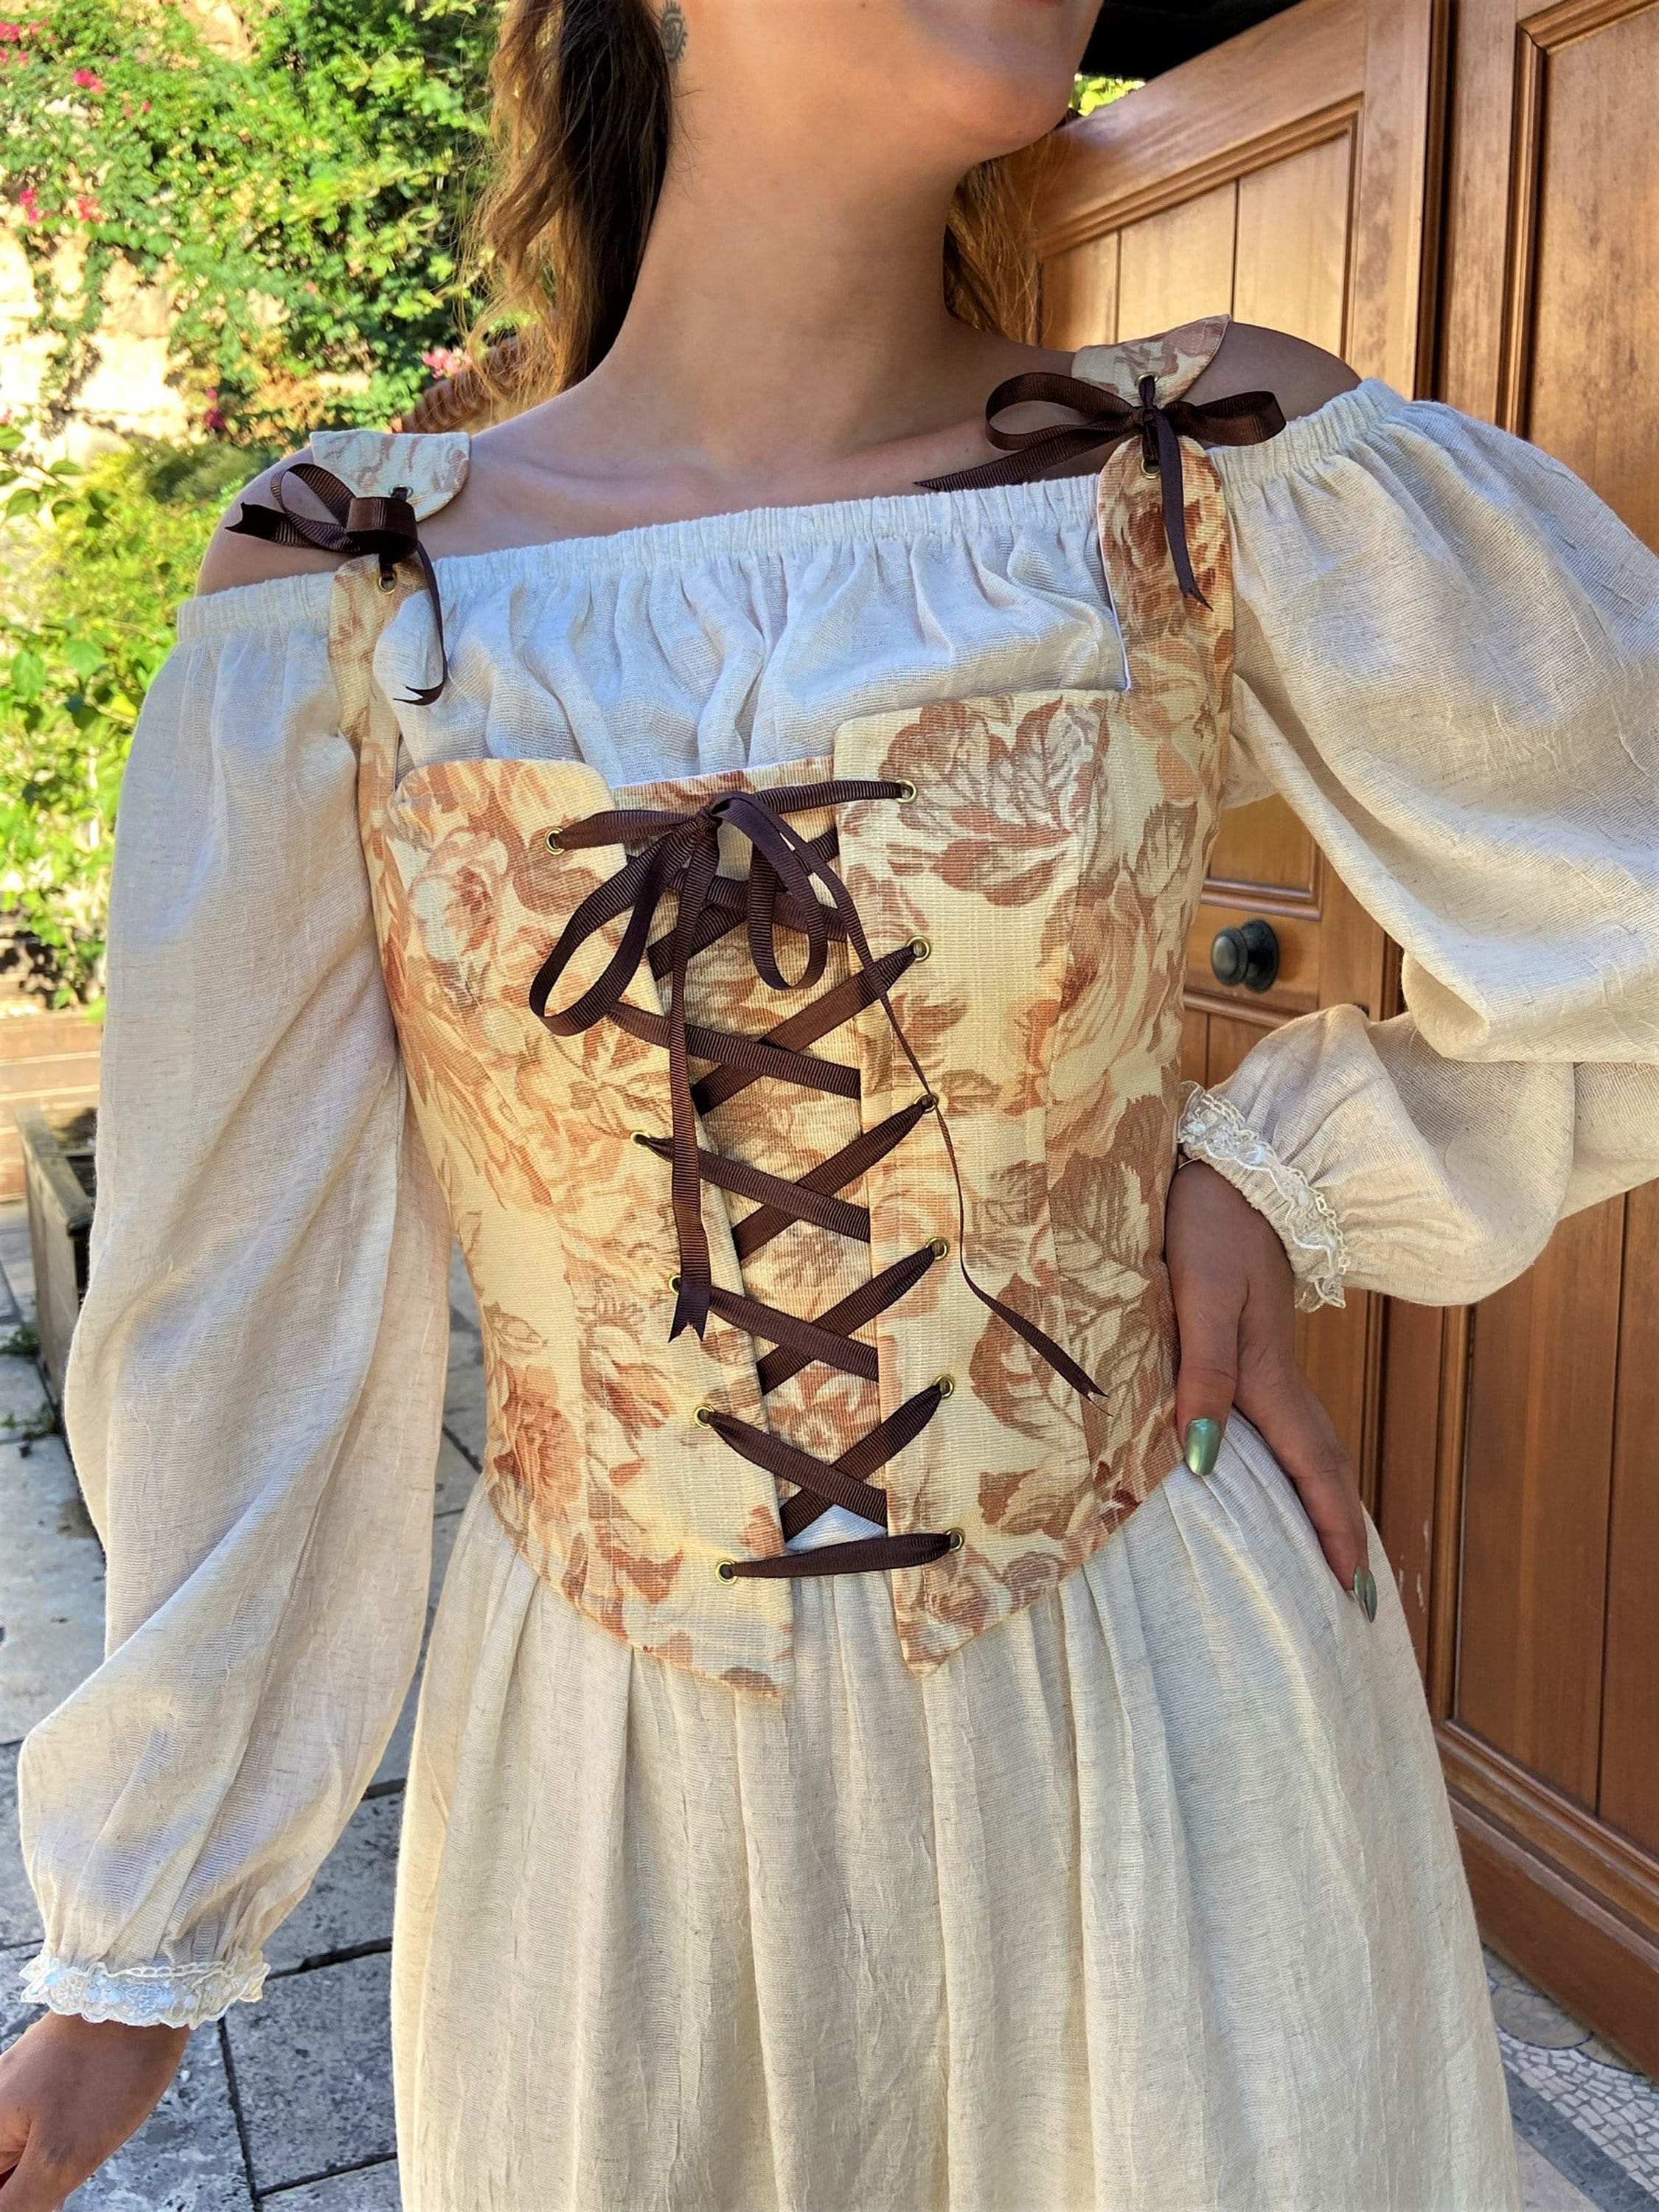 Renaissance Corset Bodice Stays in Red Maroon and Gold, Ren Fair Corset,  Corset Stays, Handmade Corset Top, Medieval Corset, Made to Measure -   Canada